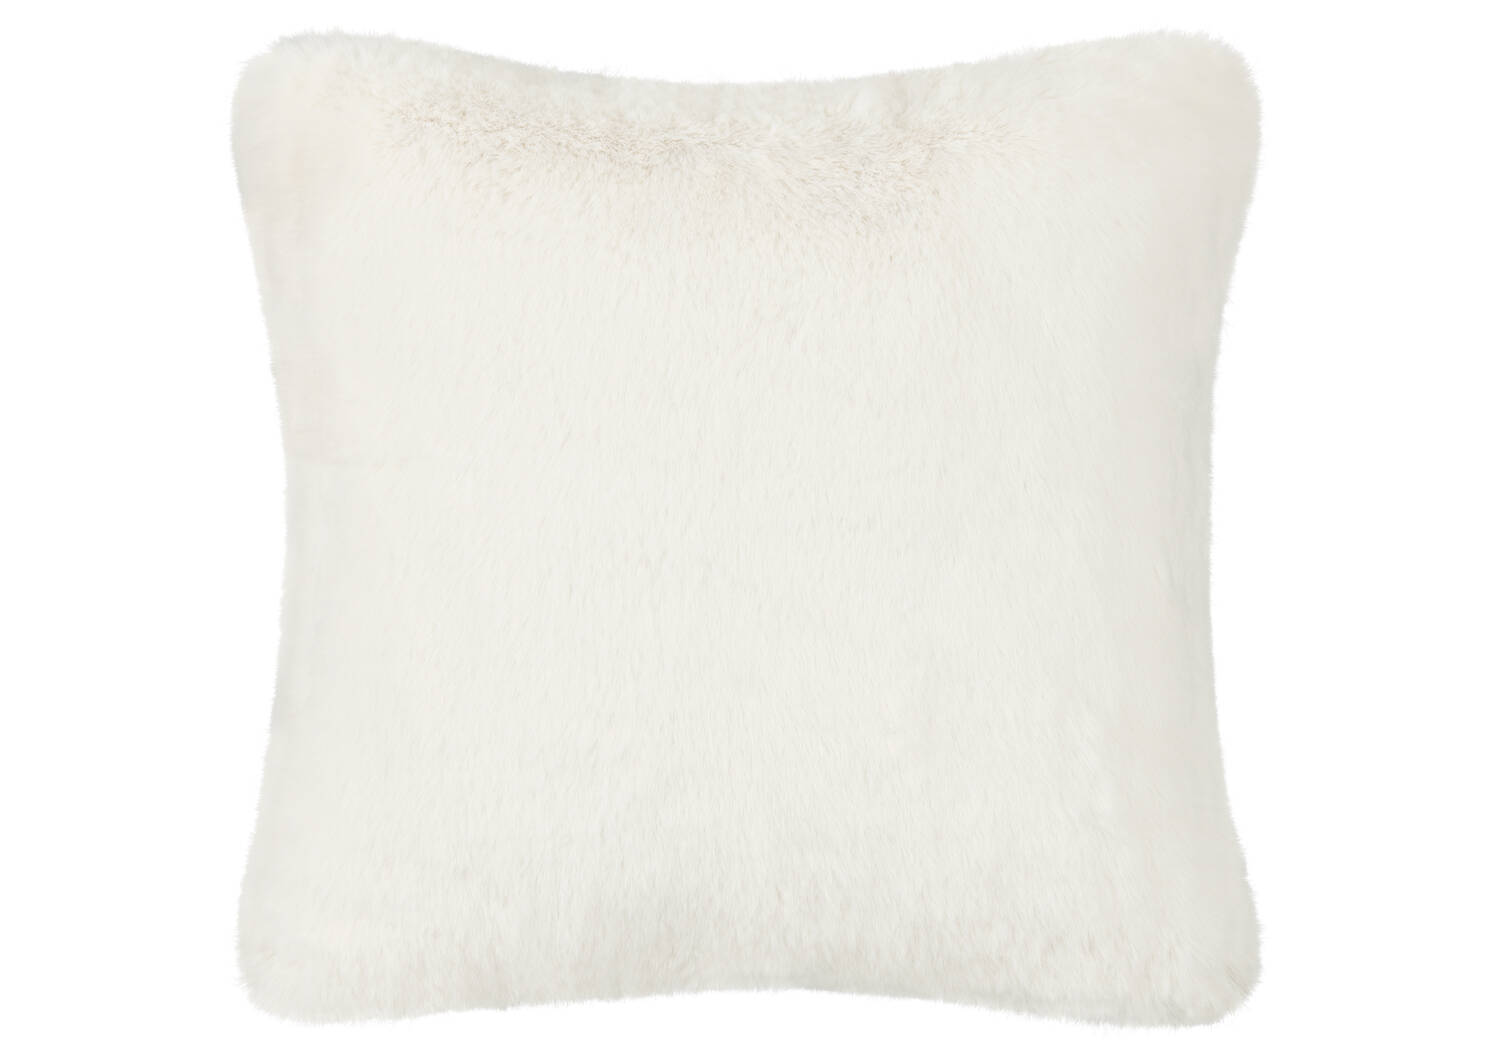 Cate Faux Fur Pillow 20x20 Ivory